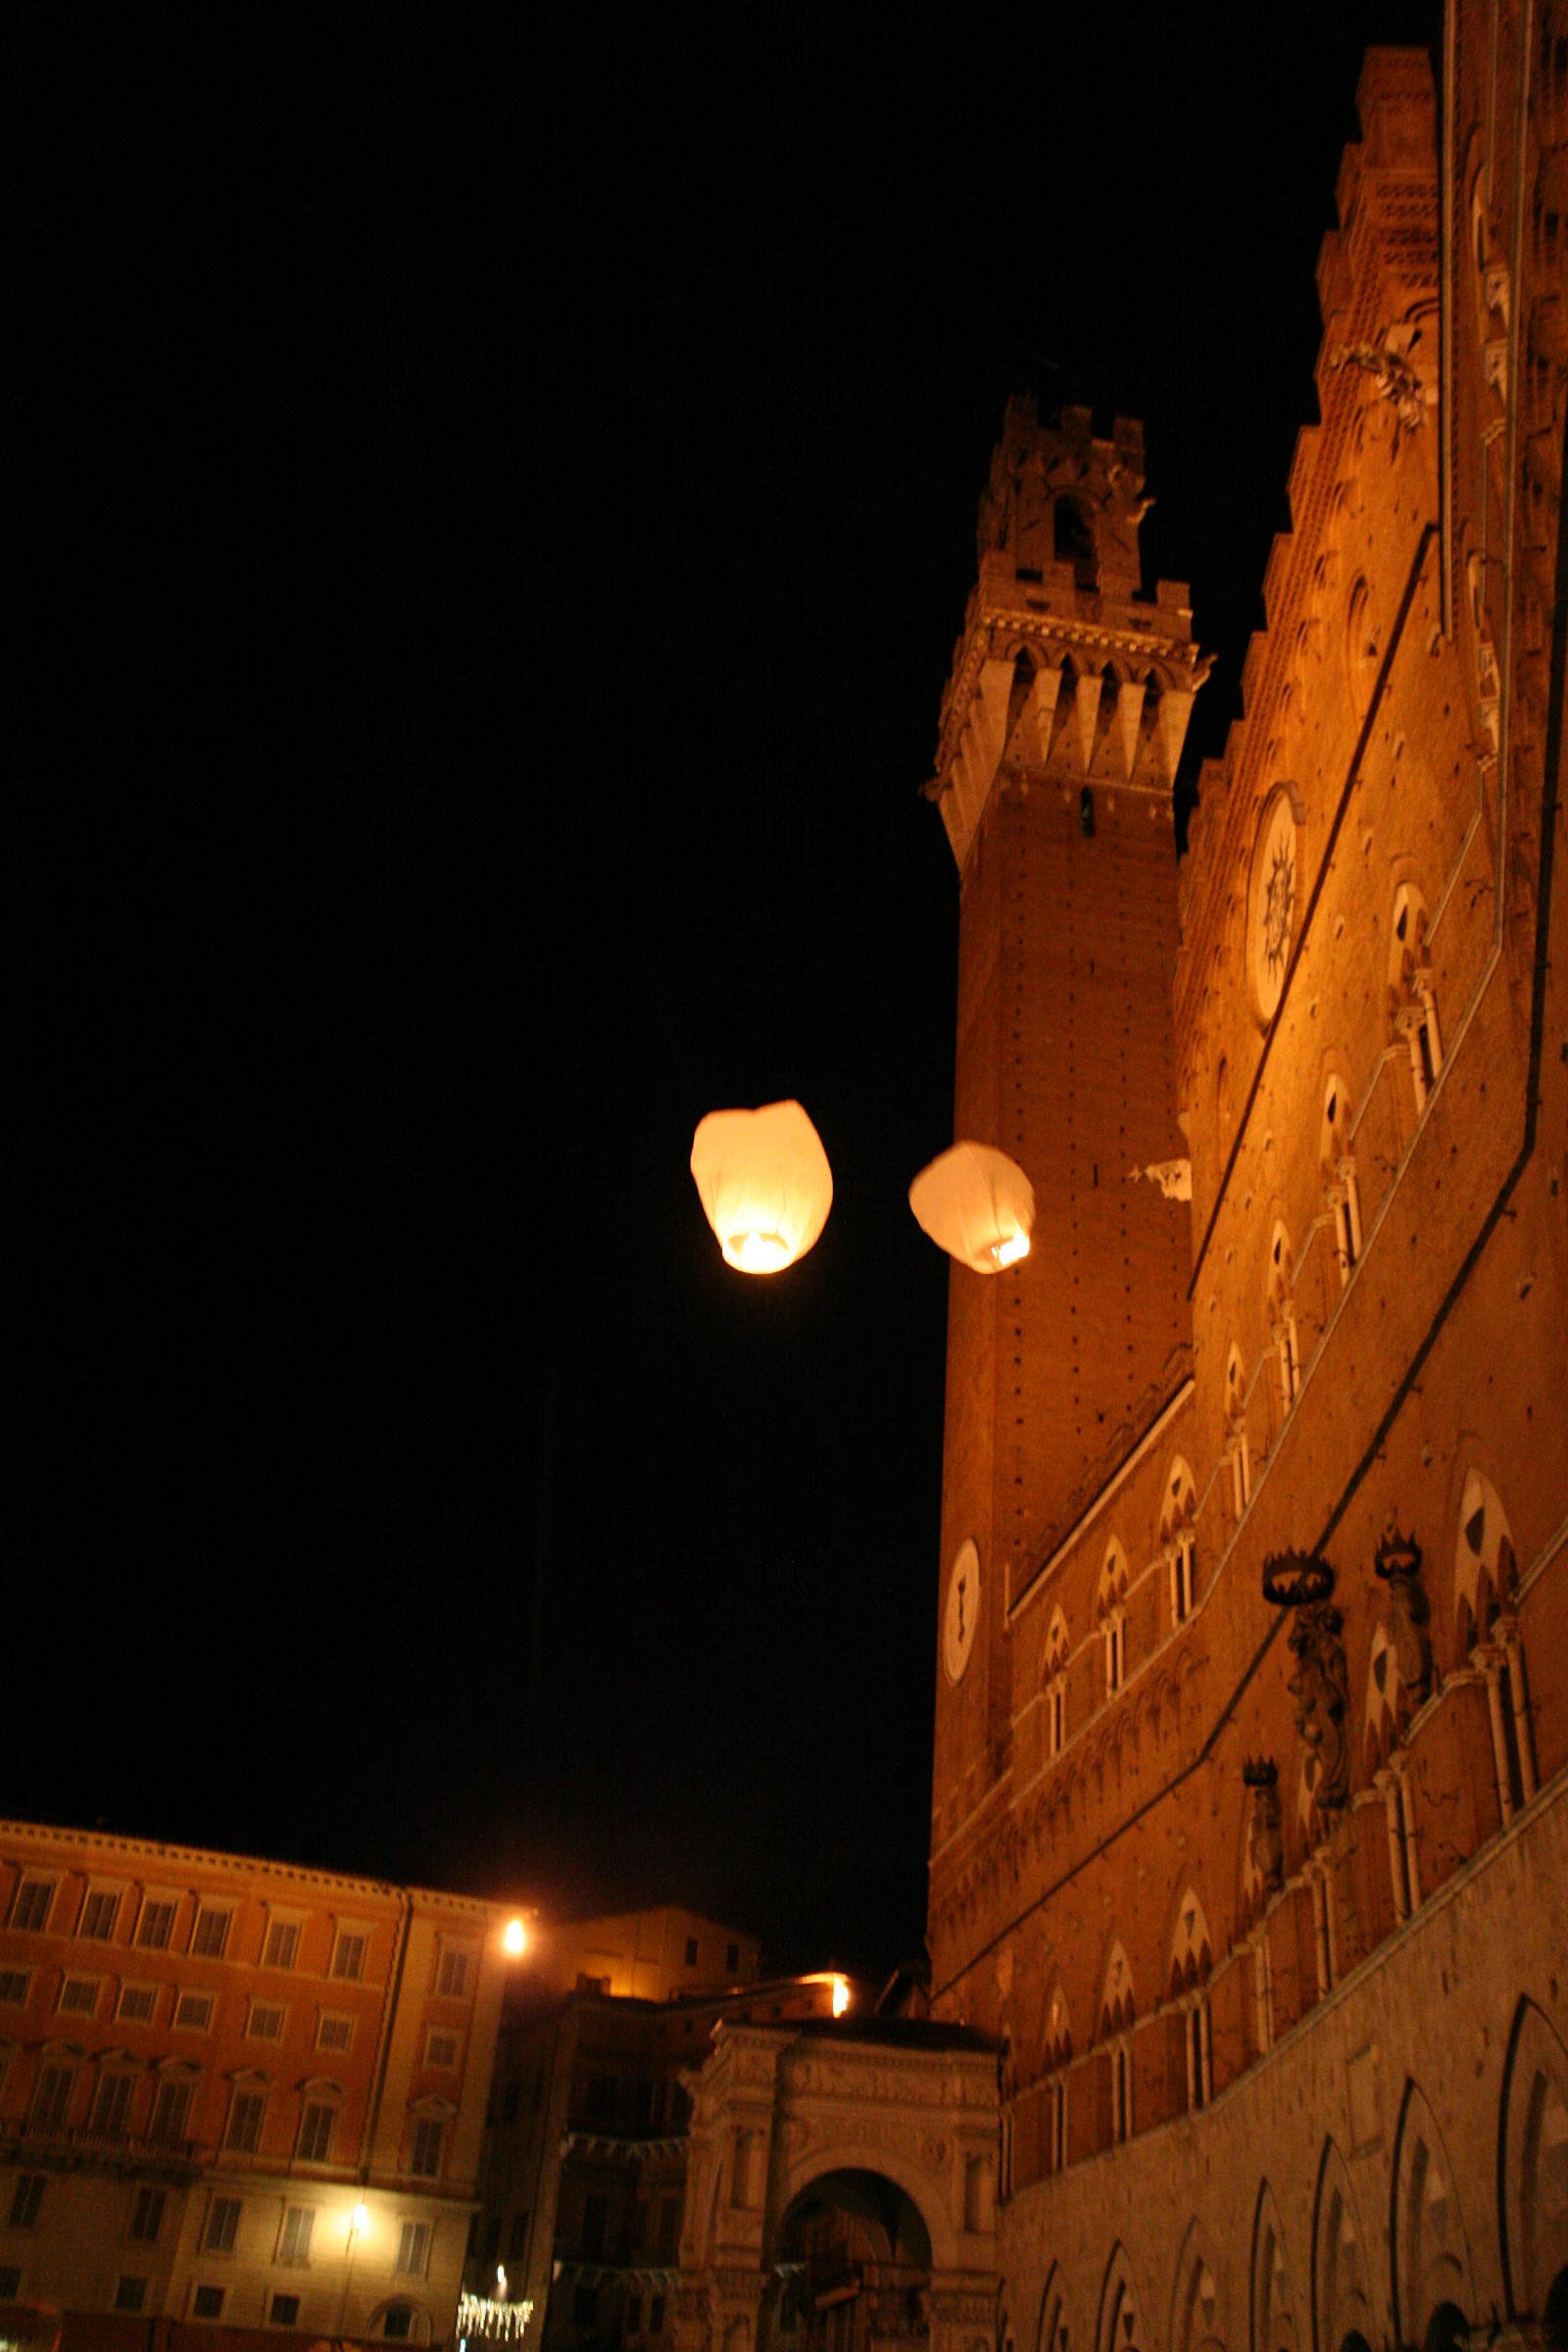 One evening in the Piazza del Campo...